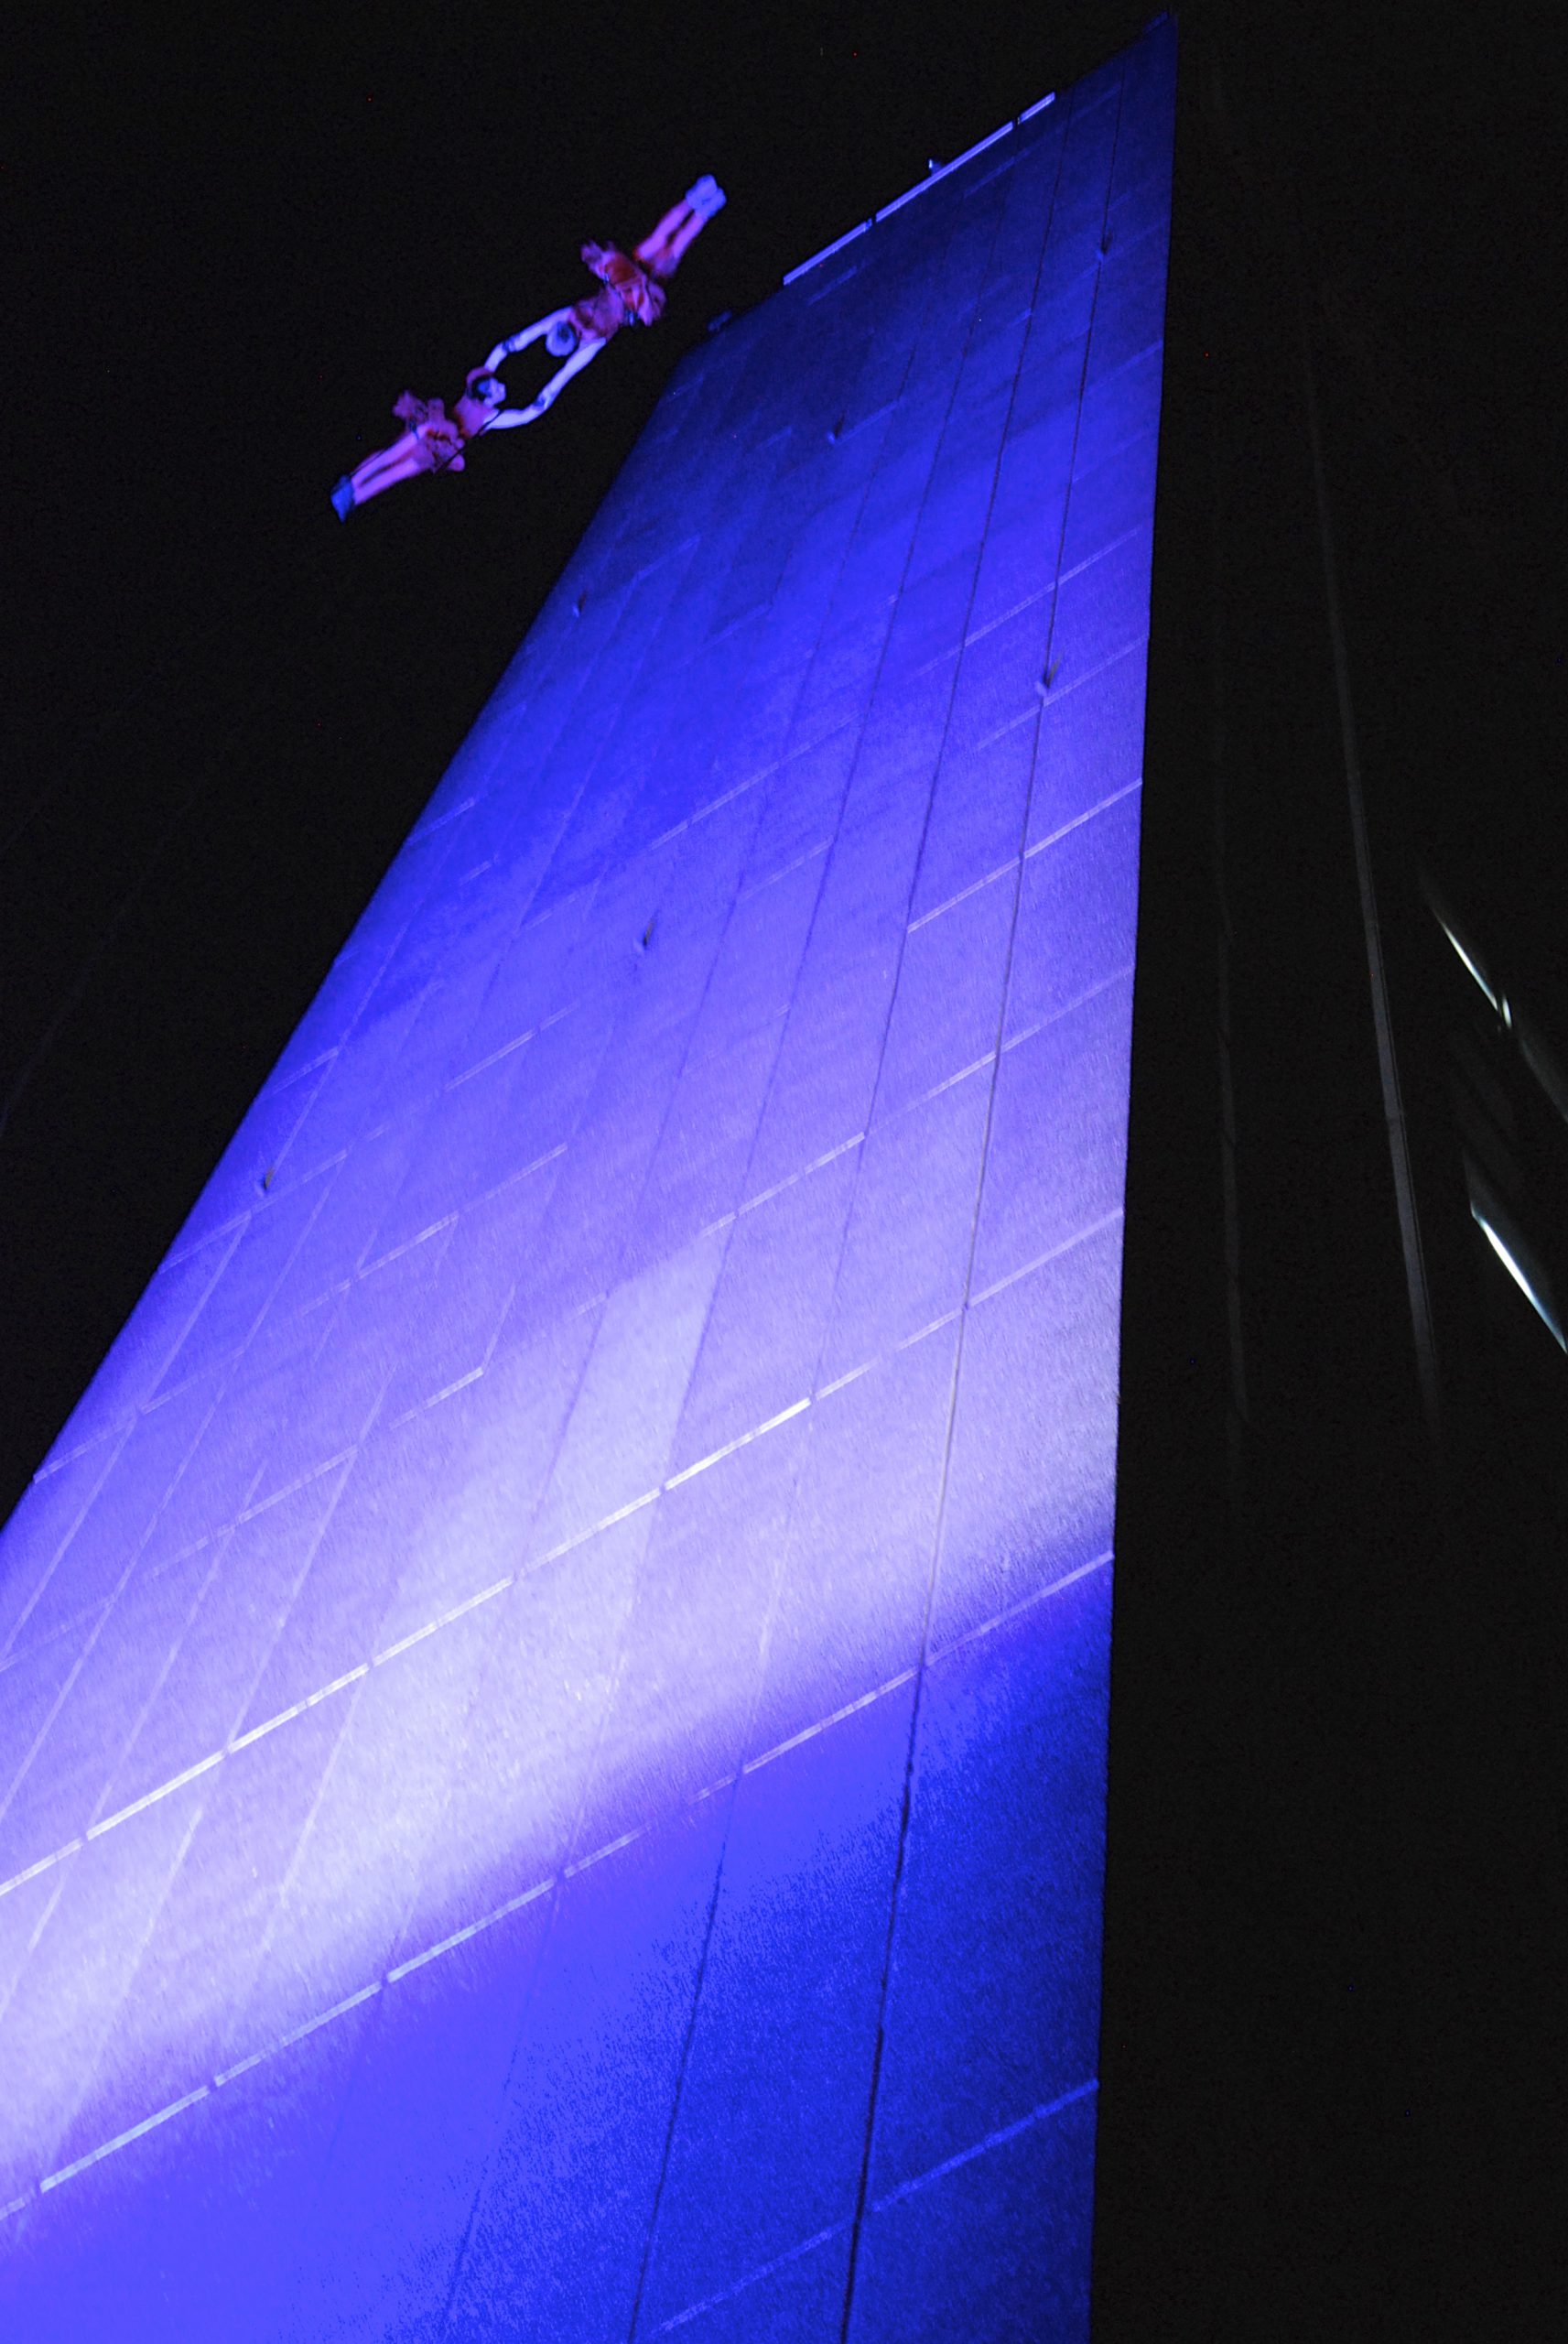 Two performers suspended looking as though they are falling from the top of a tall building spotlighted in blue